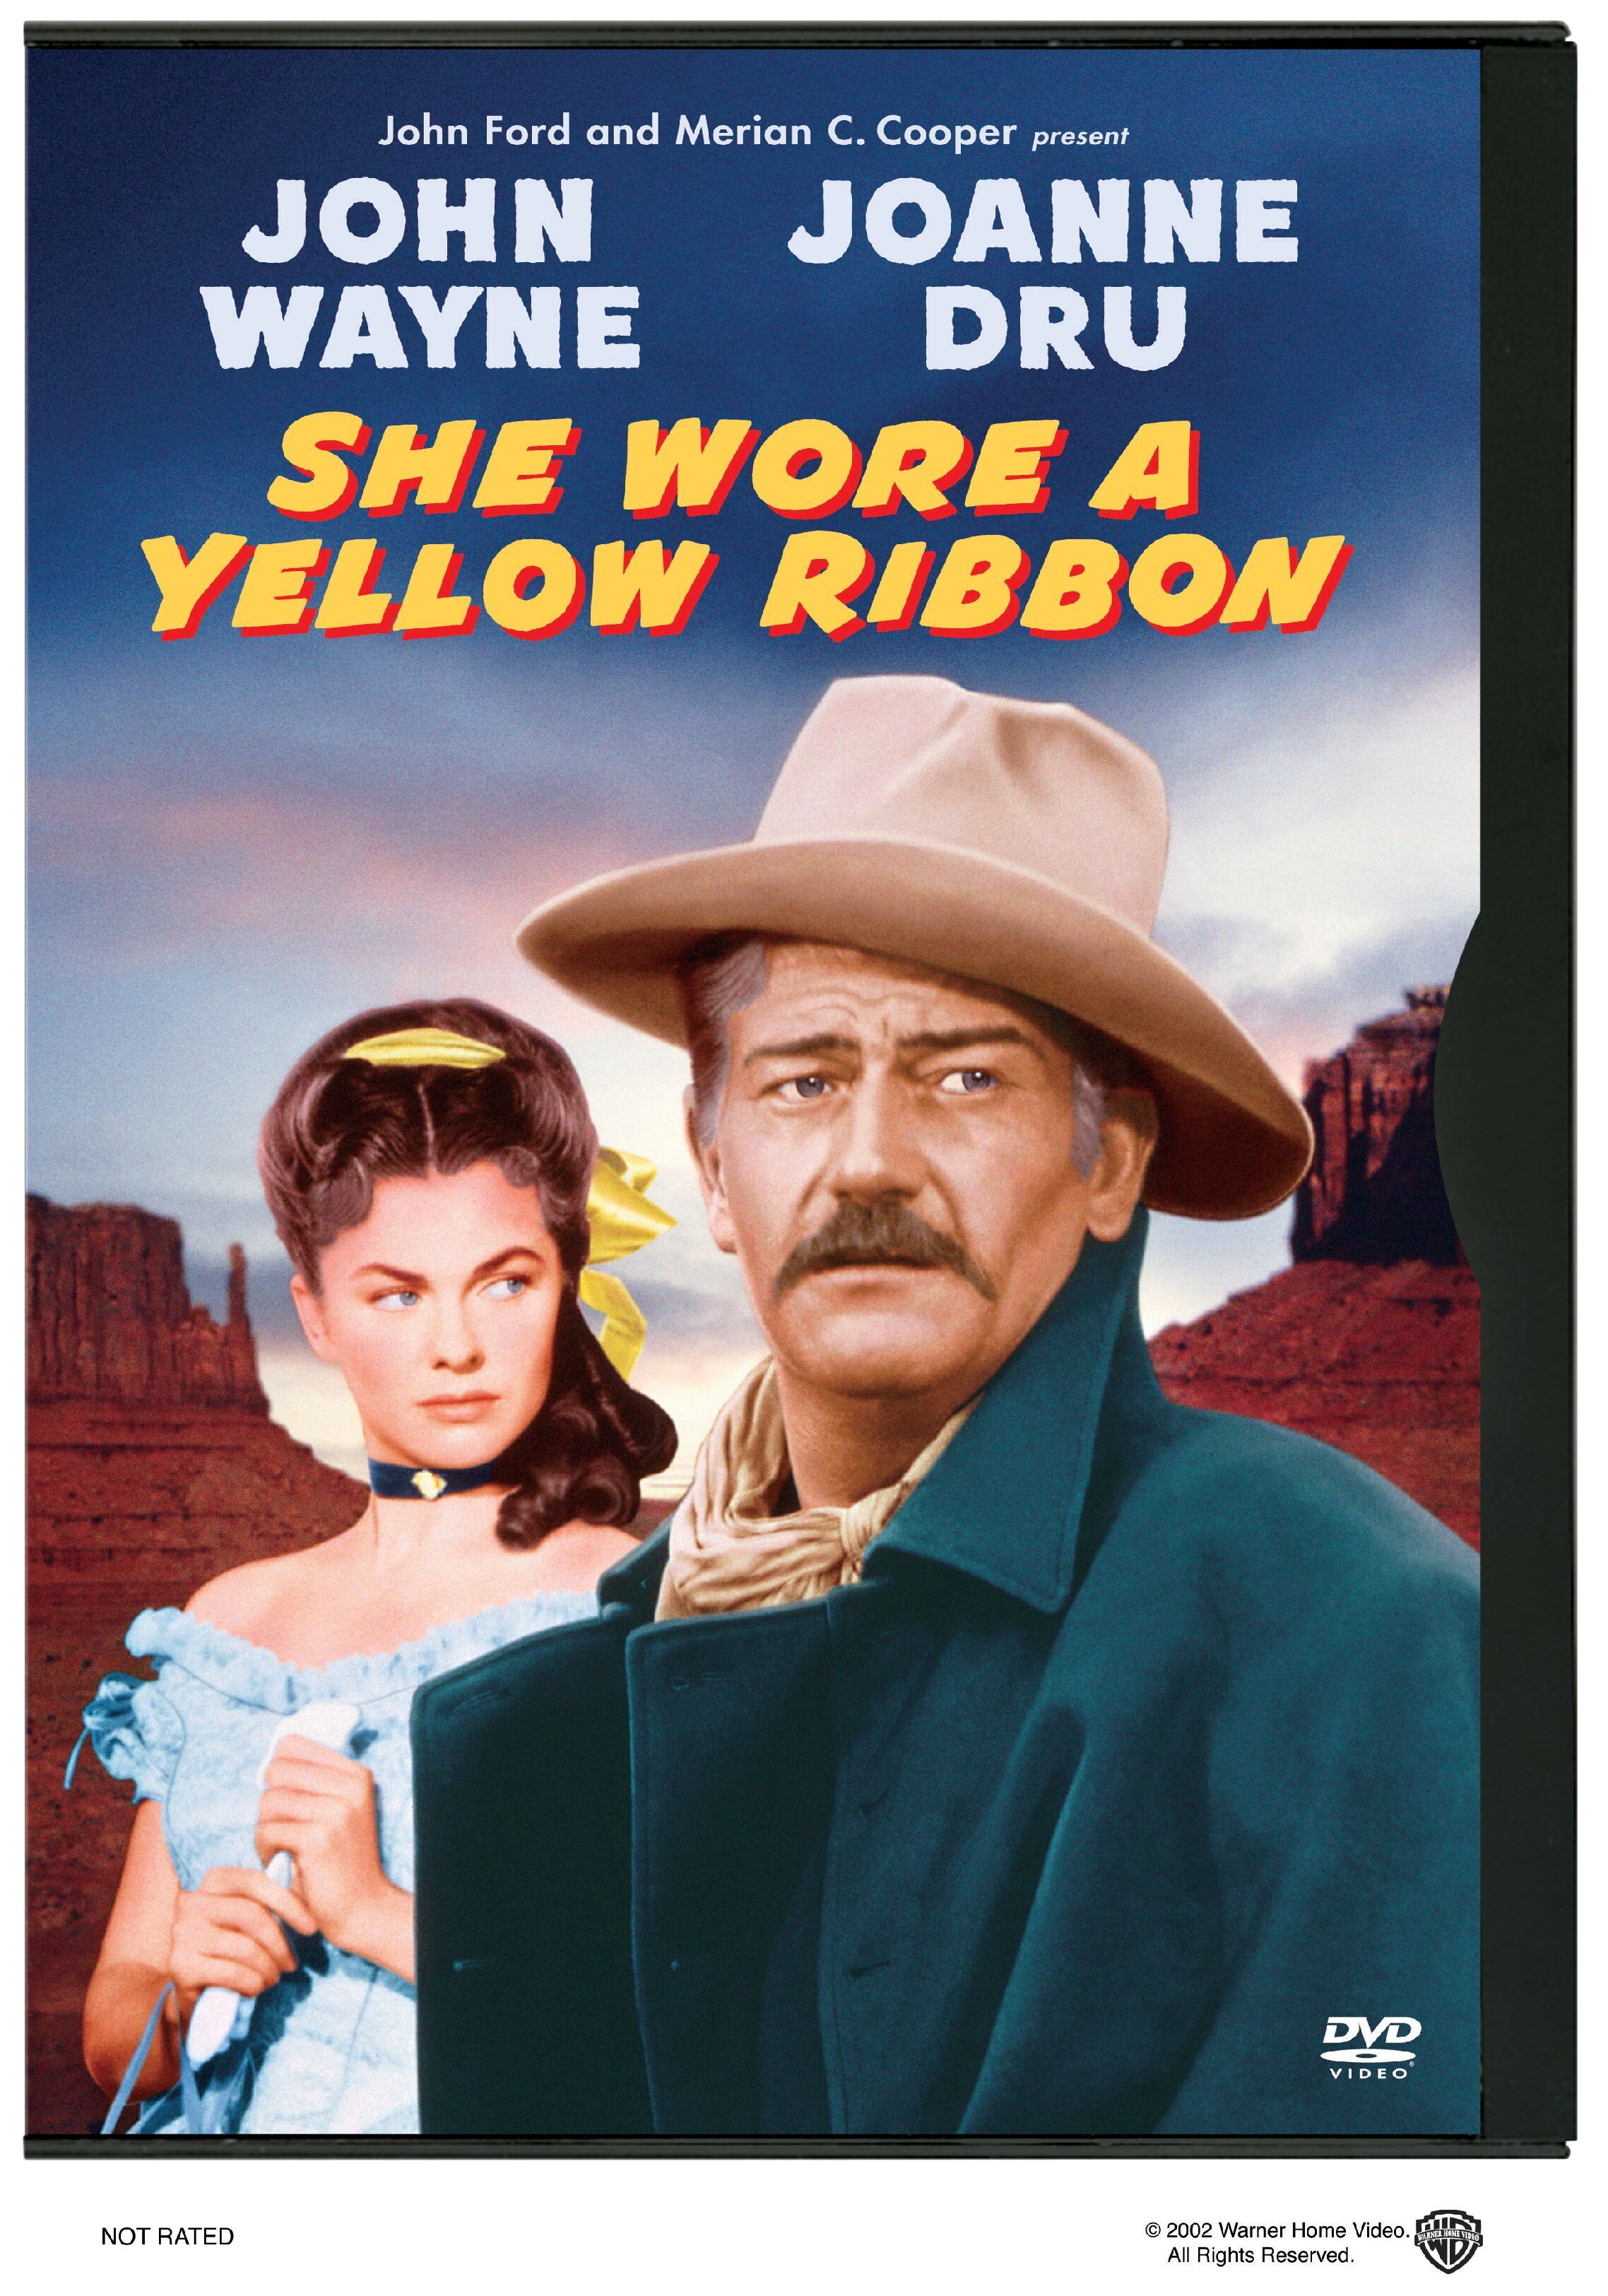 She Wore A Yellow Ribbon (DVD Full Screen) - DVD [ 1949 ]  - Western Movies On DVD - Movies On GRUV